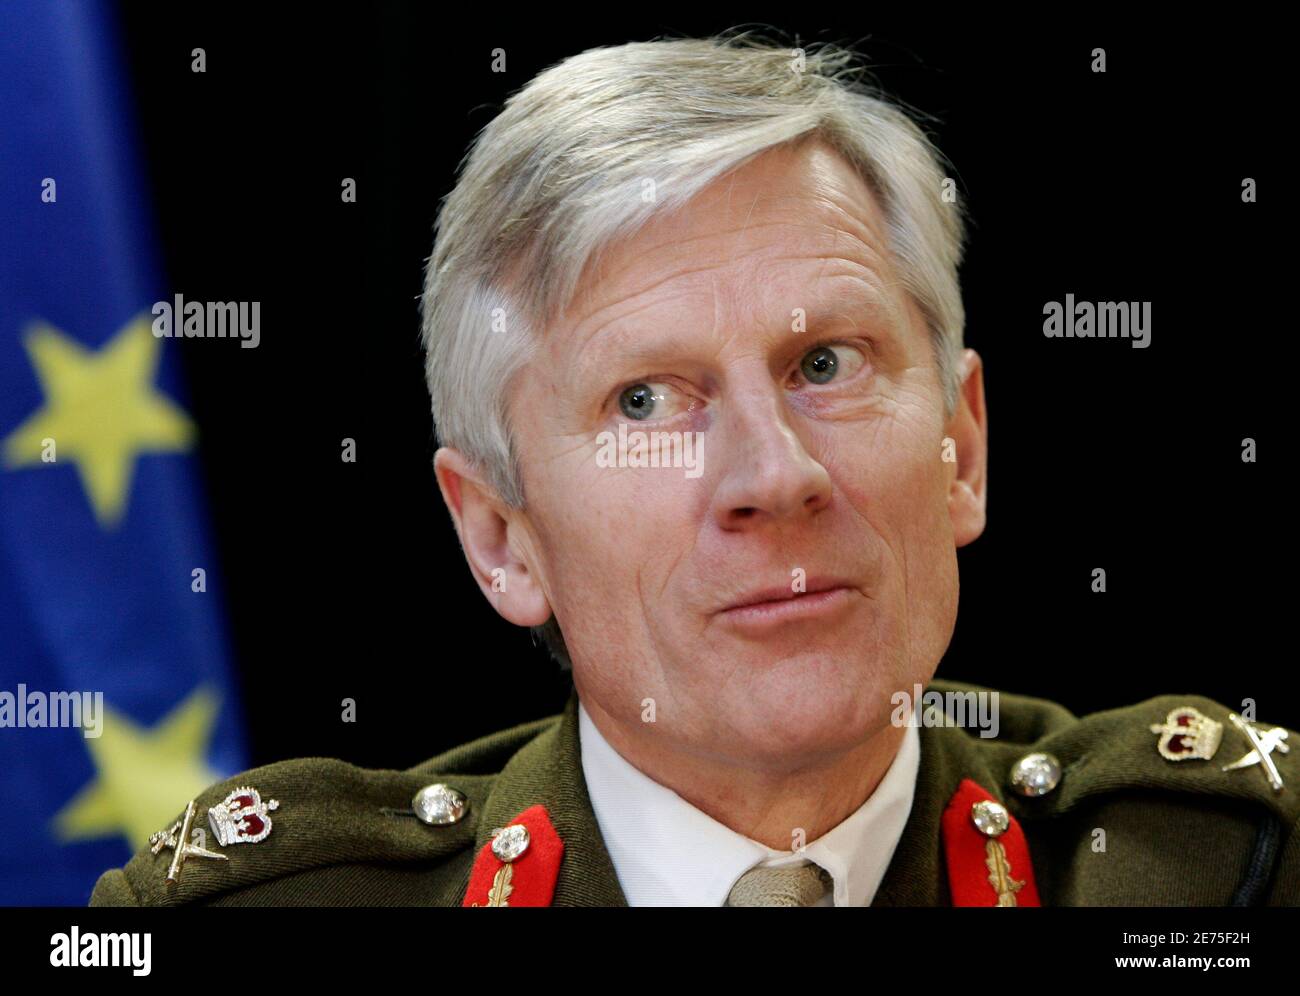 Incoming Director General of the European Union Military Staff (EUMS) David  Leakey of Britain briefs the media during a news conference at the EU  Council in Brussels February 28, 2007. REUTERS/Francois Lenoir (